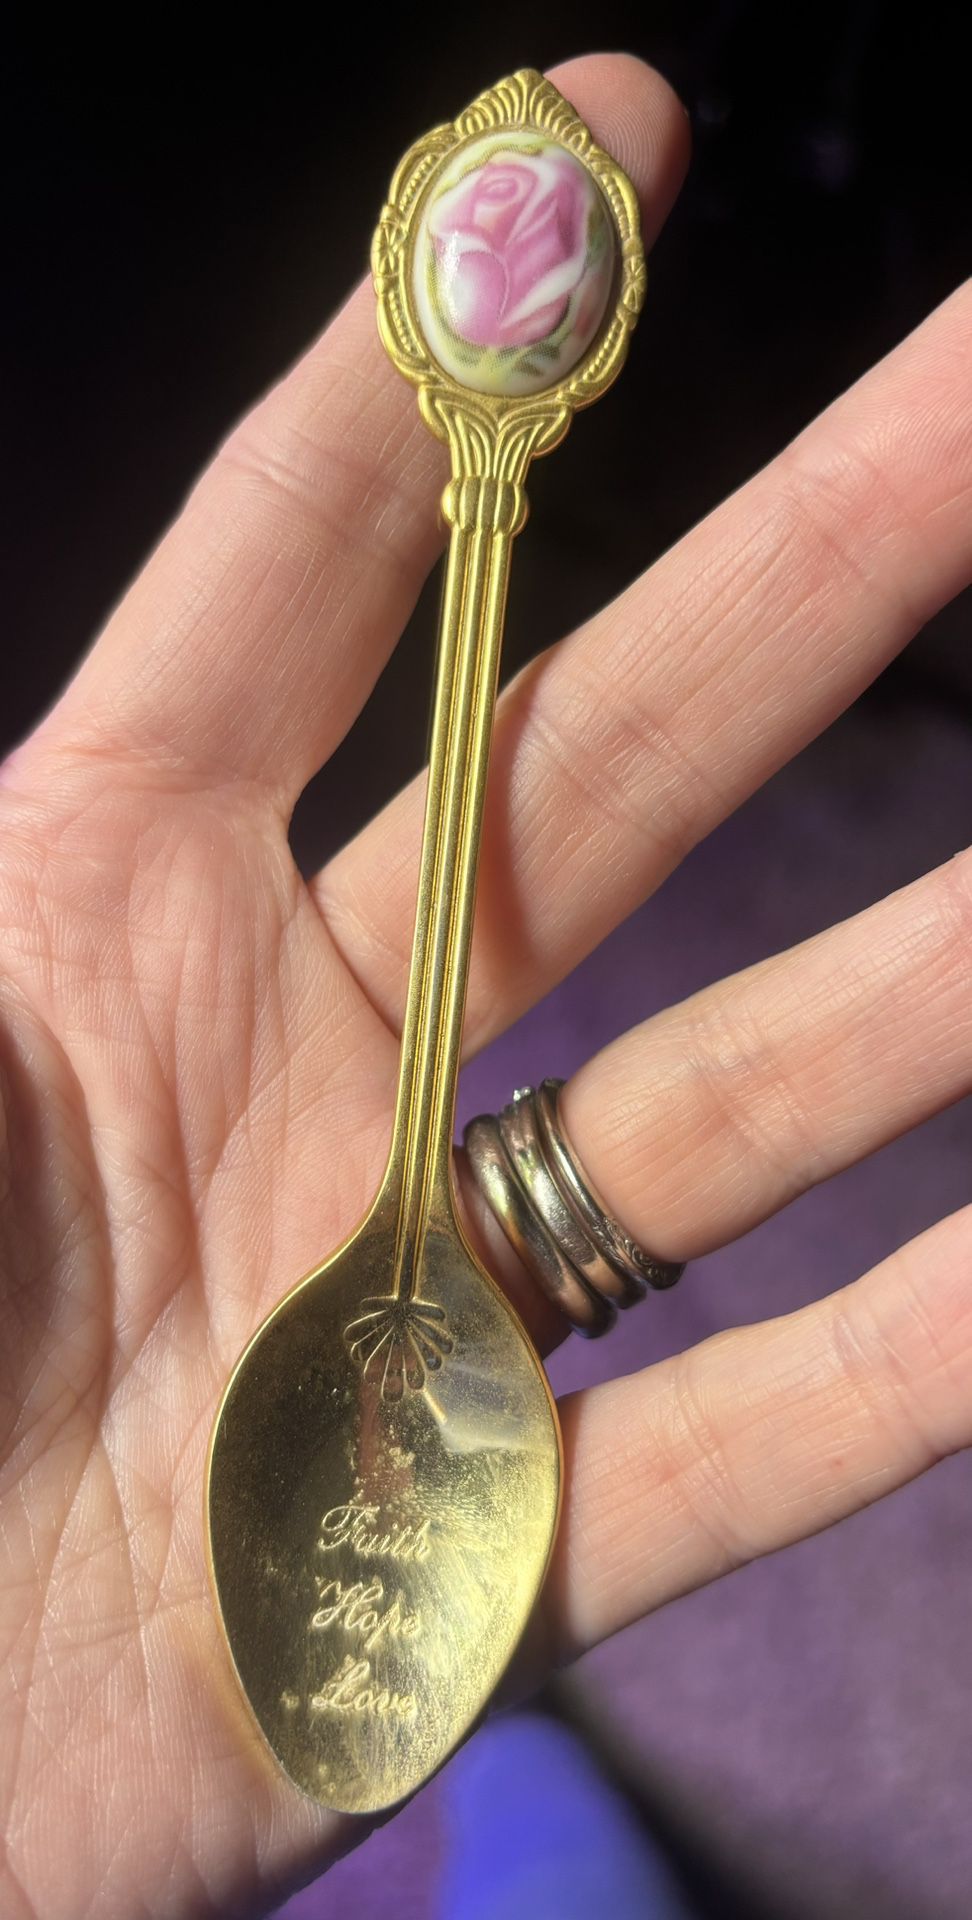 Collectible Inspirational Spoon Gold Tone Metal Ceramic Or Porcelain